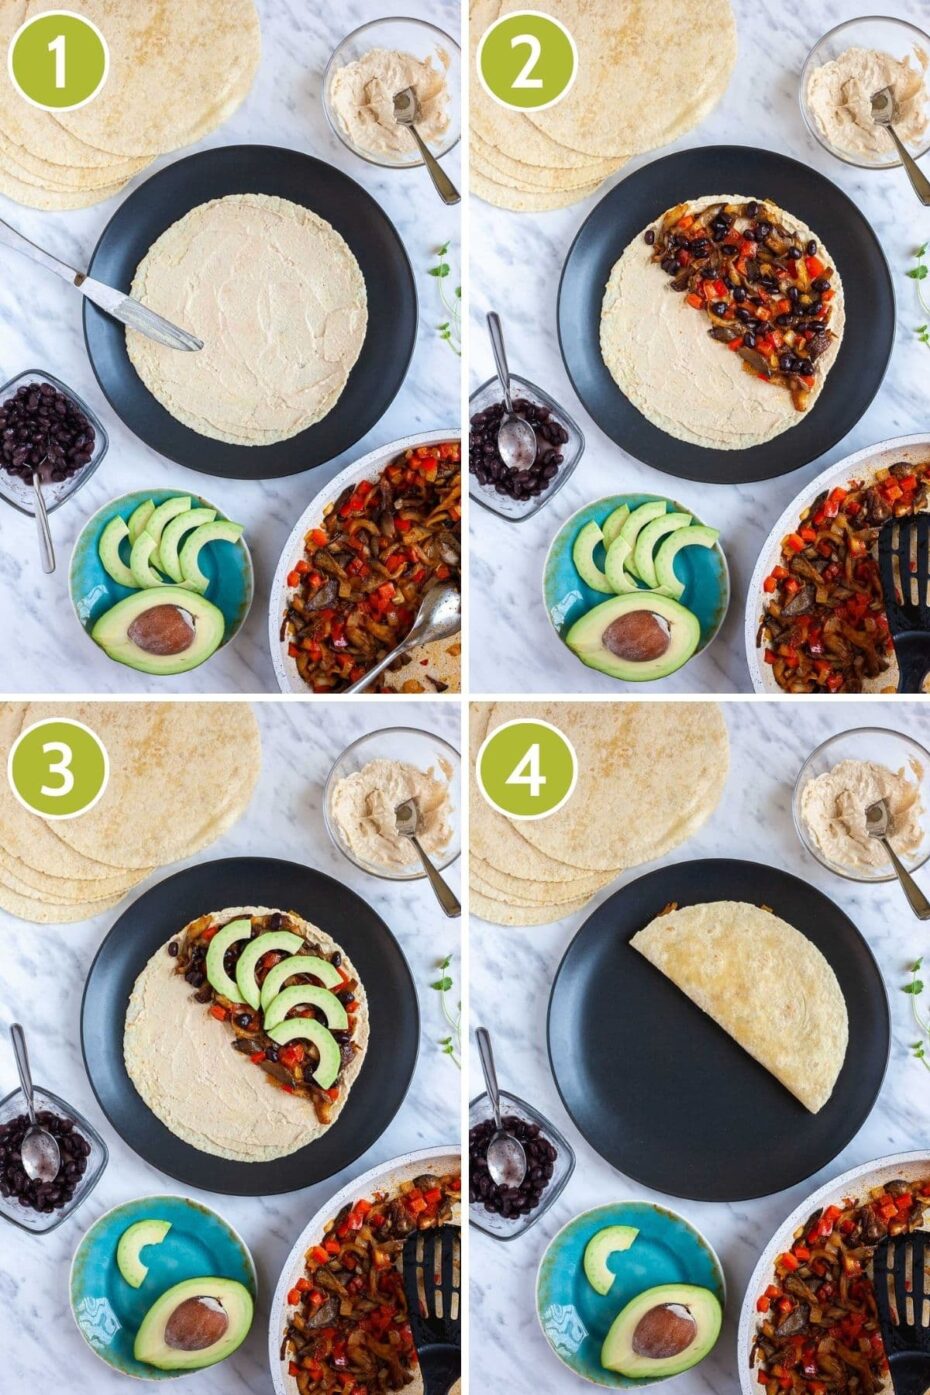 4 photo collage of a black plate showing the steps to assemble a quesadilla - first hummus layer, then chopped veggie layer, then avocado slices, finally folded in half